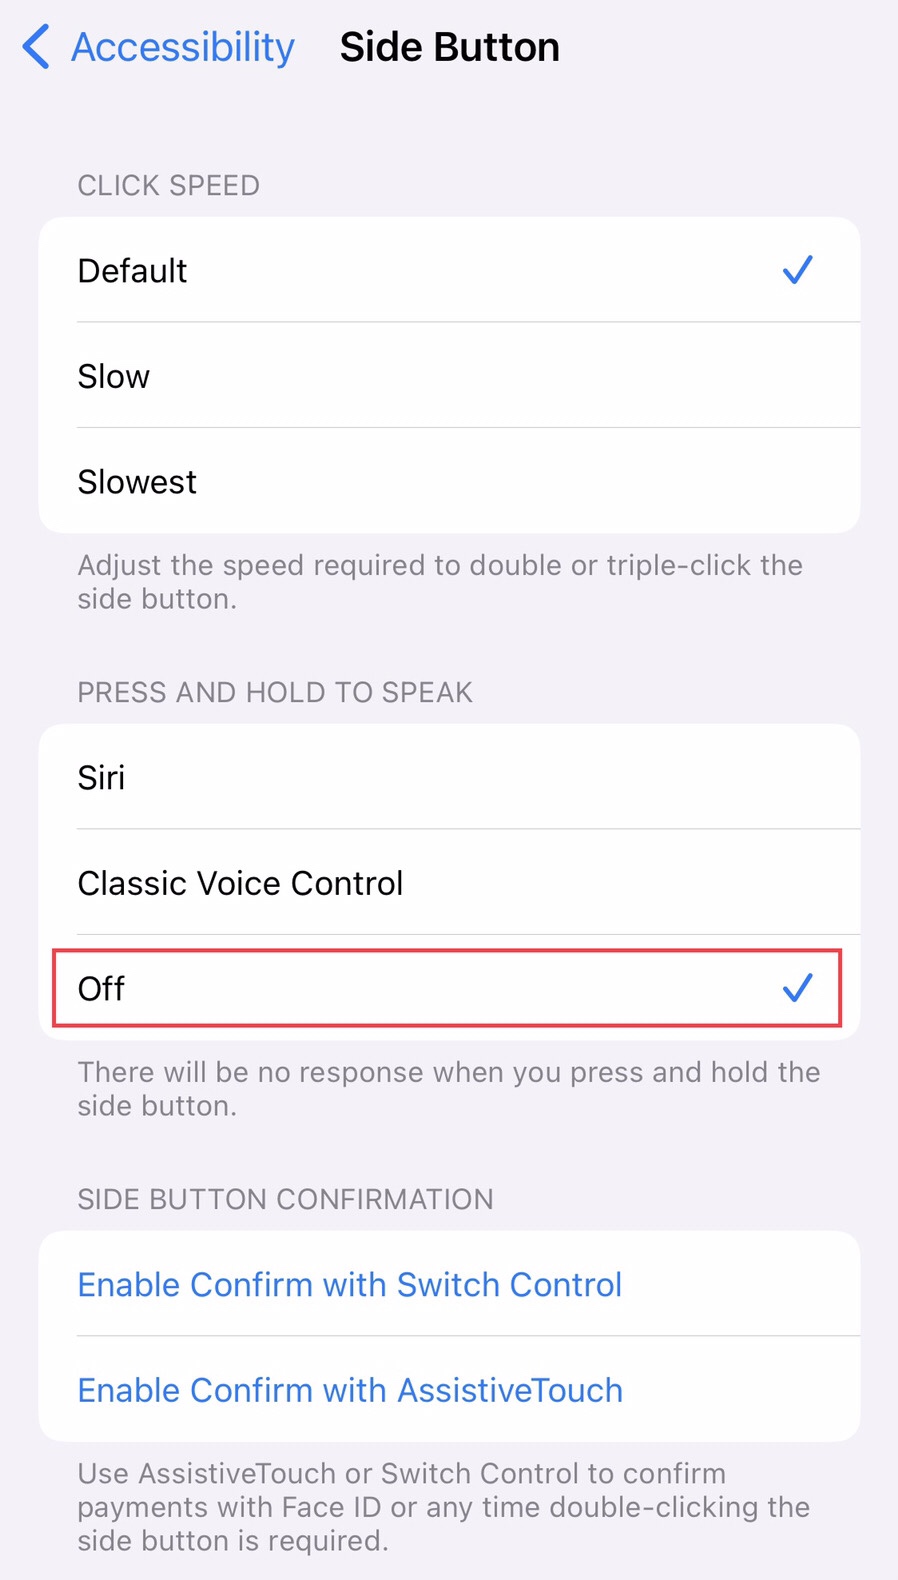 To Disable the lock button on iPhone (11, 12, and 13) in iOS 16,​ select the “Off” option from the side button menu.